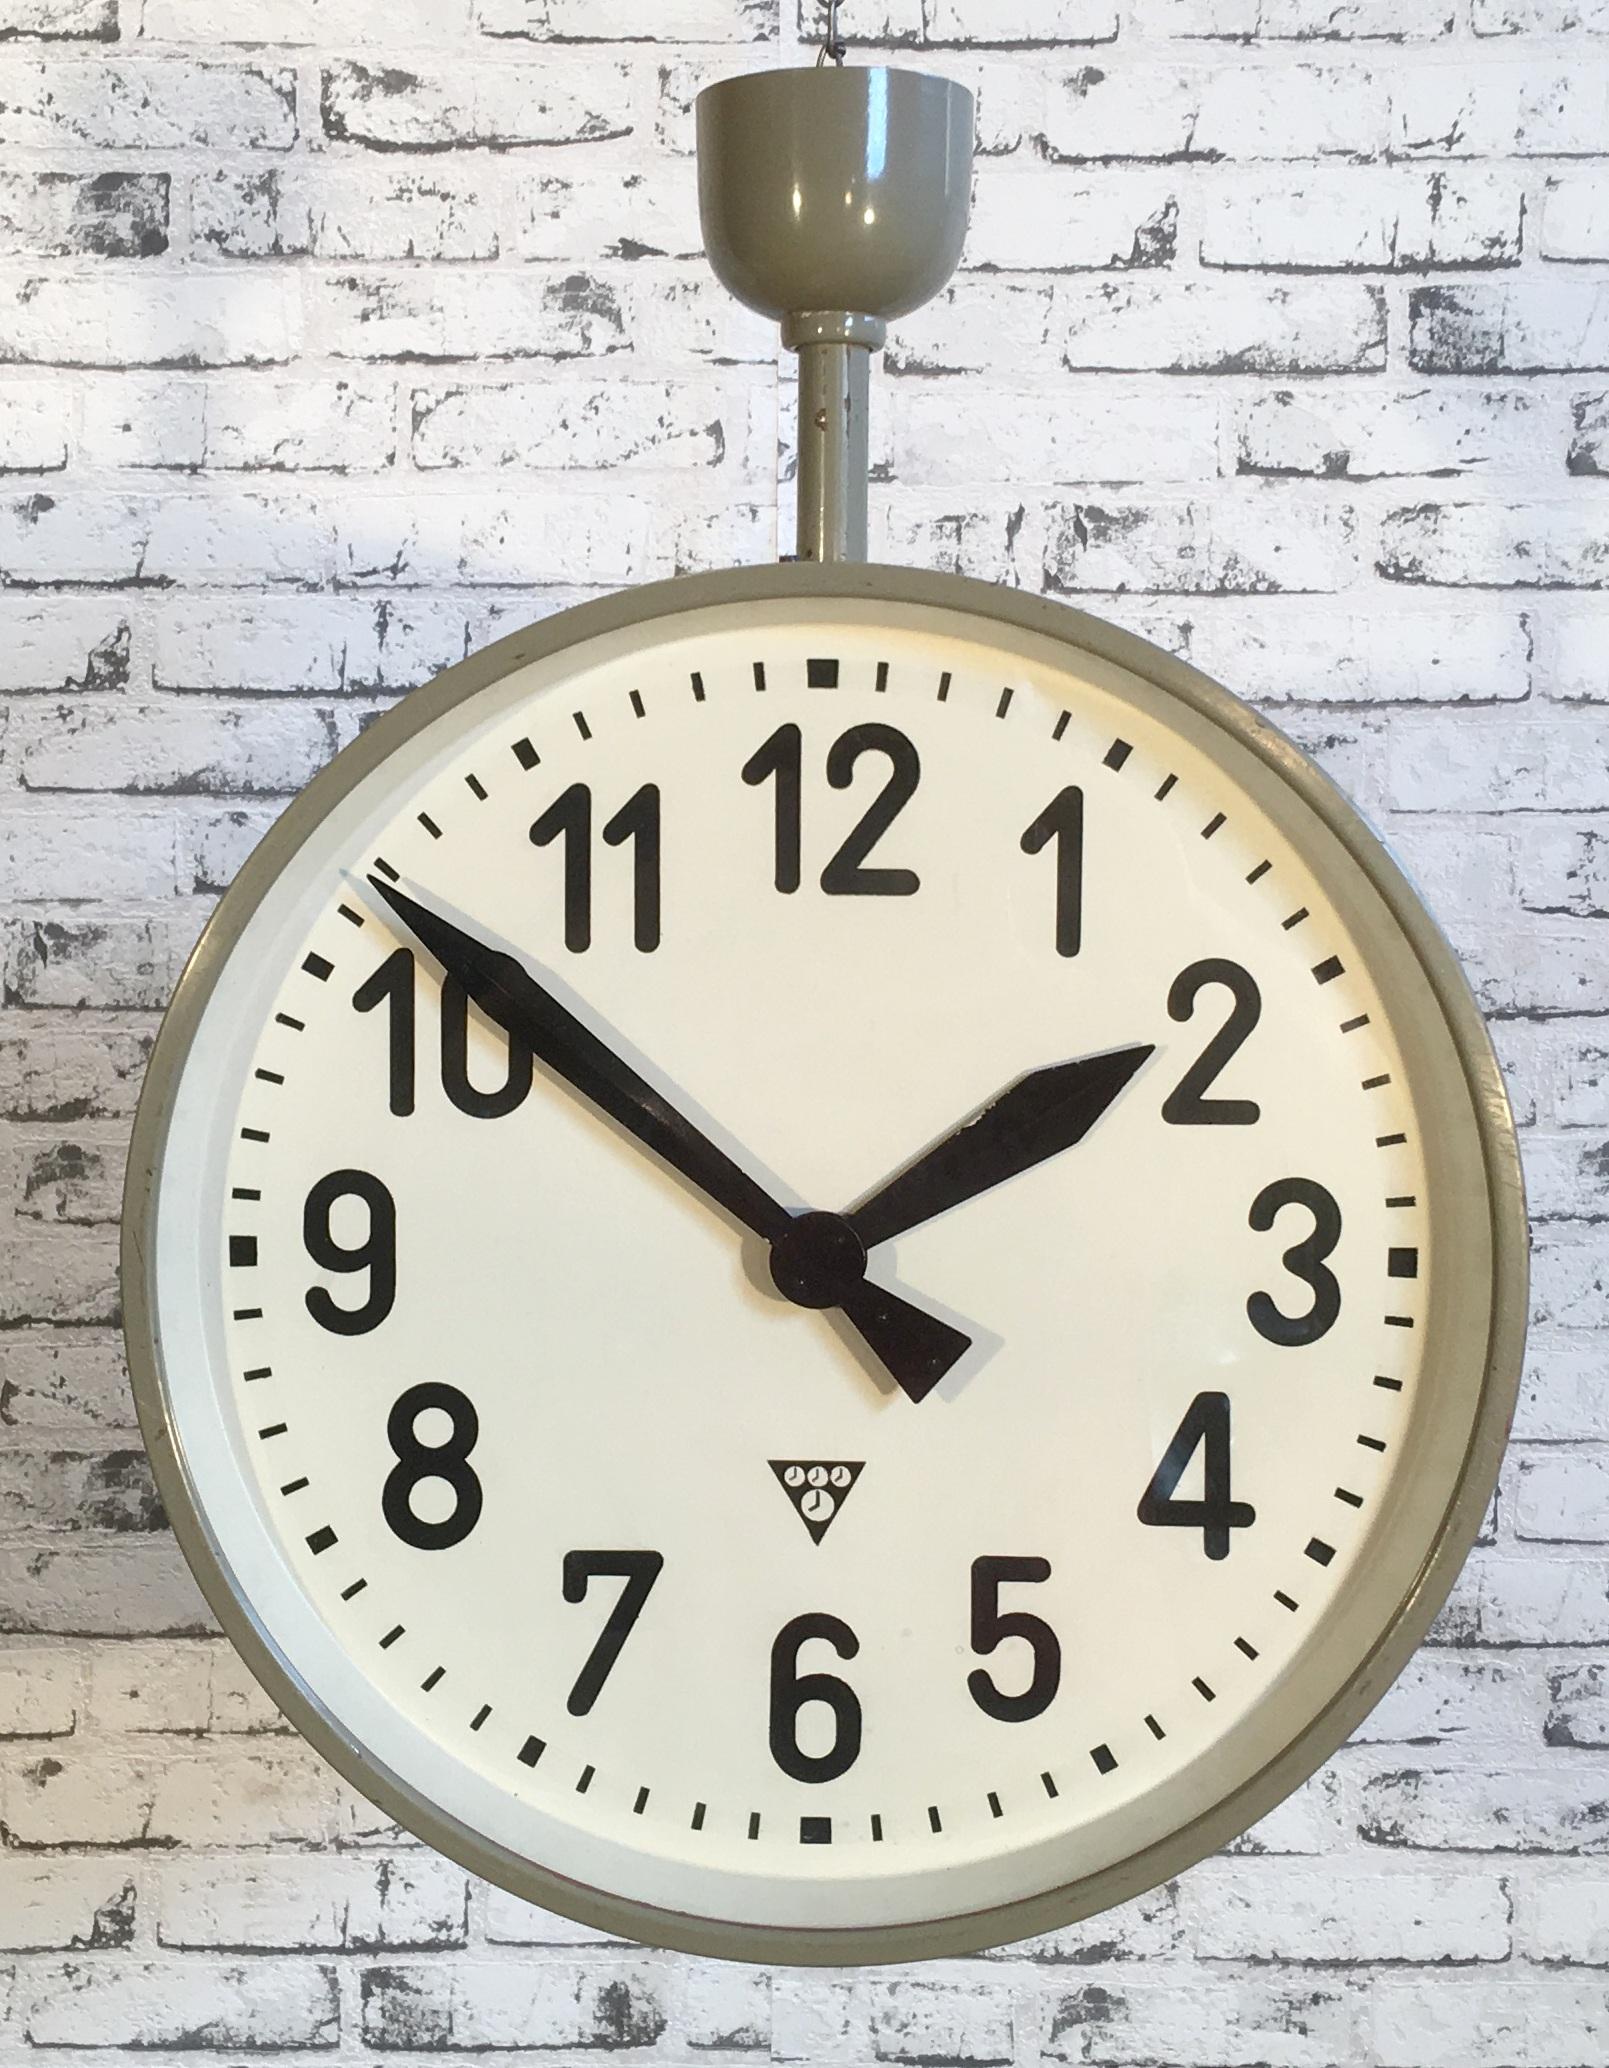 This large double-sided railway or factory clock was produced by Pragotron, in former Czechoslovakia, during the 1950s. The piece features a grey metal body and a clear glass cover. The clock has been converted into battery-powered clockwork and